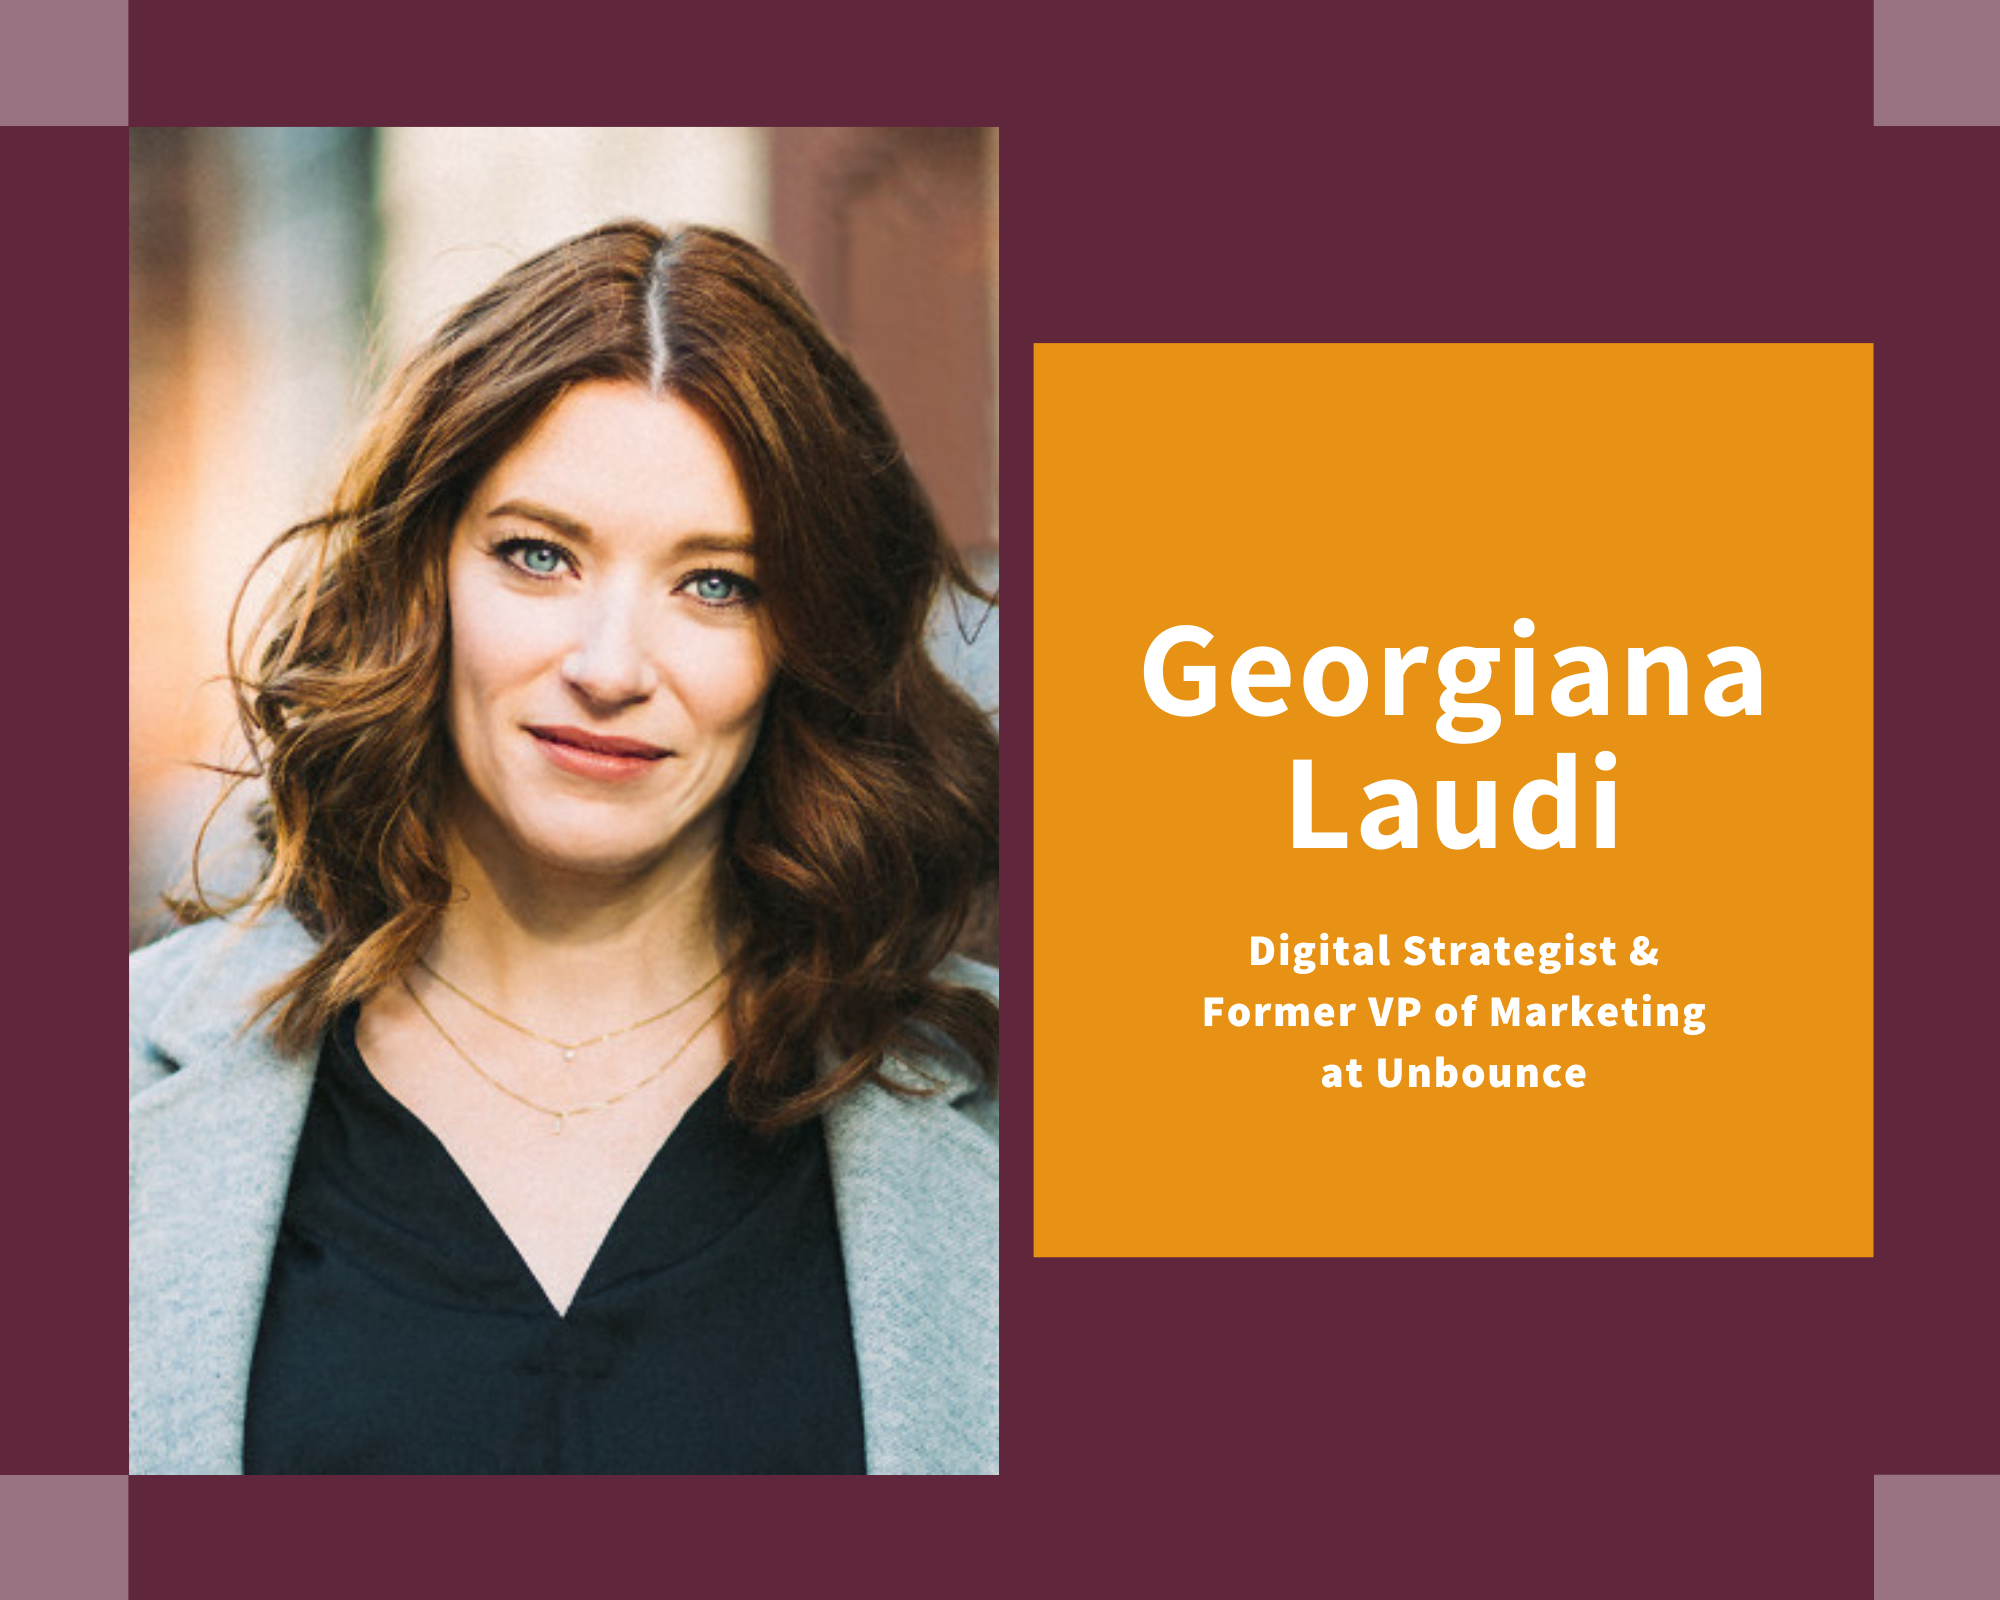 Georgiana Laudi weighs in on the skills every conversion rate expert needs.